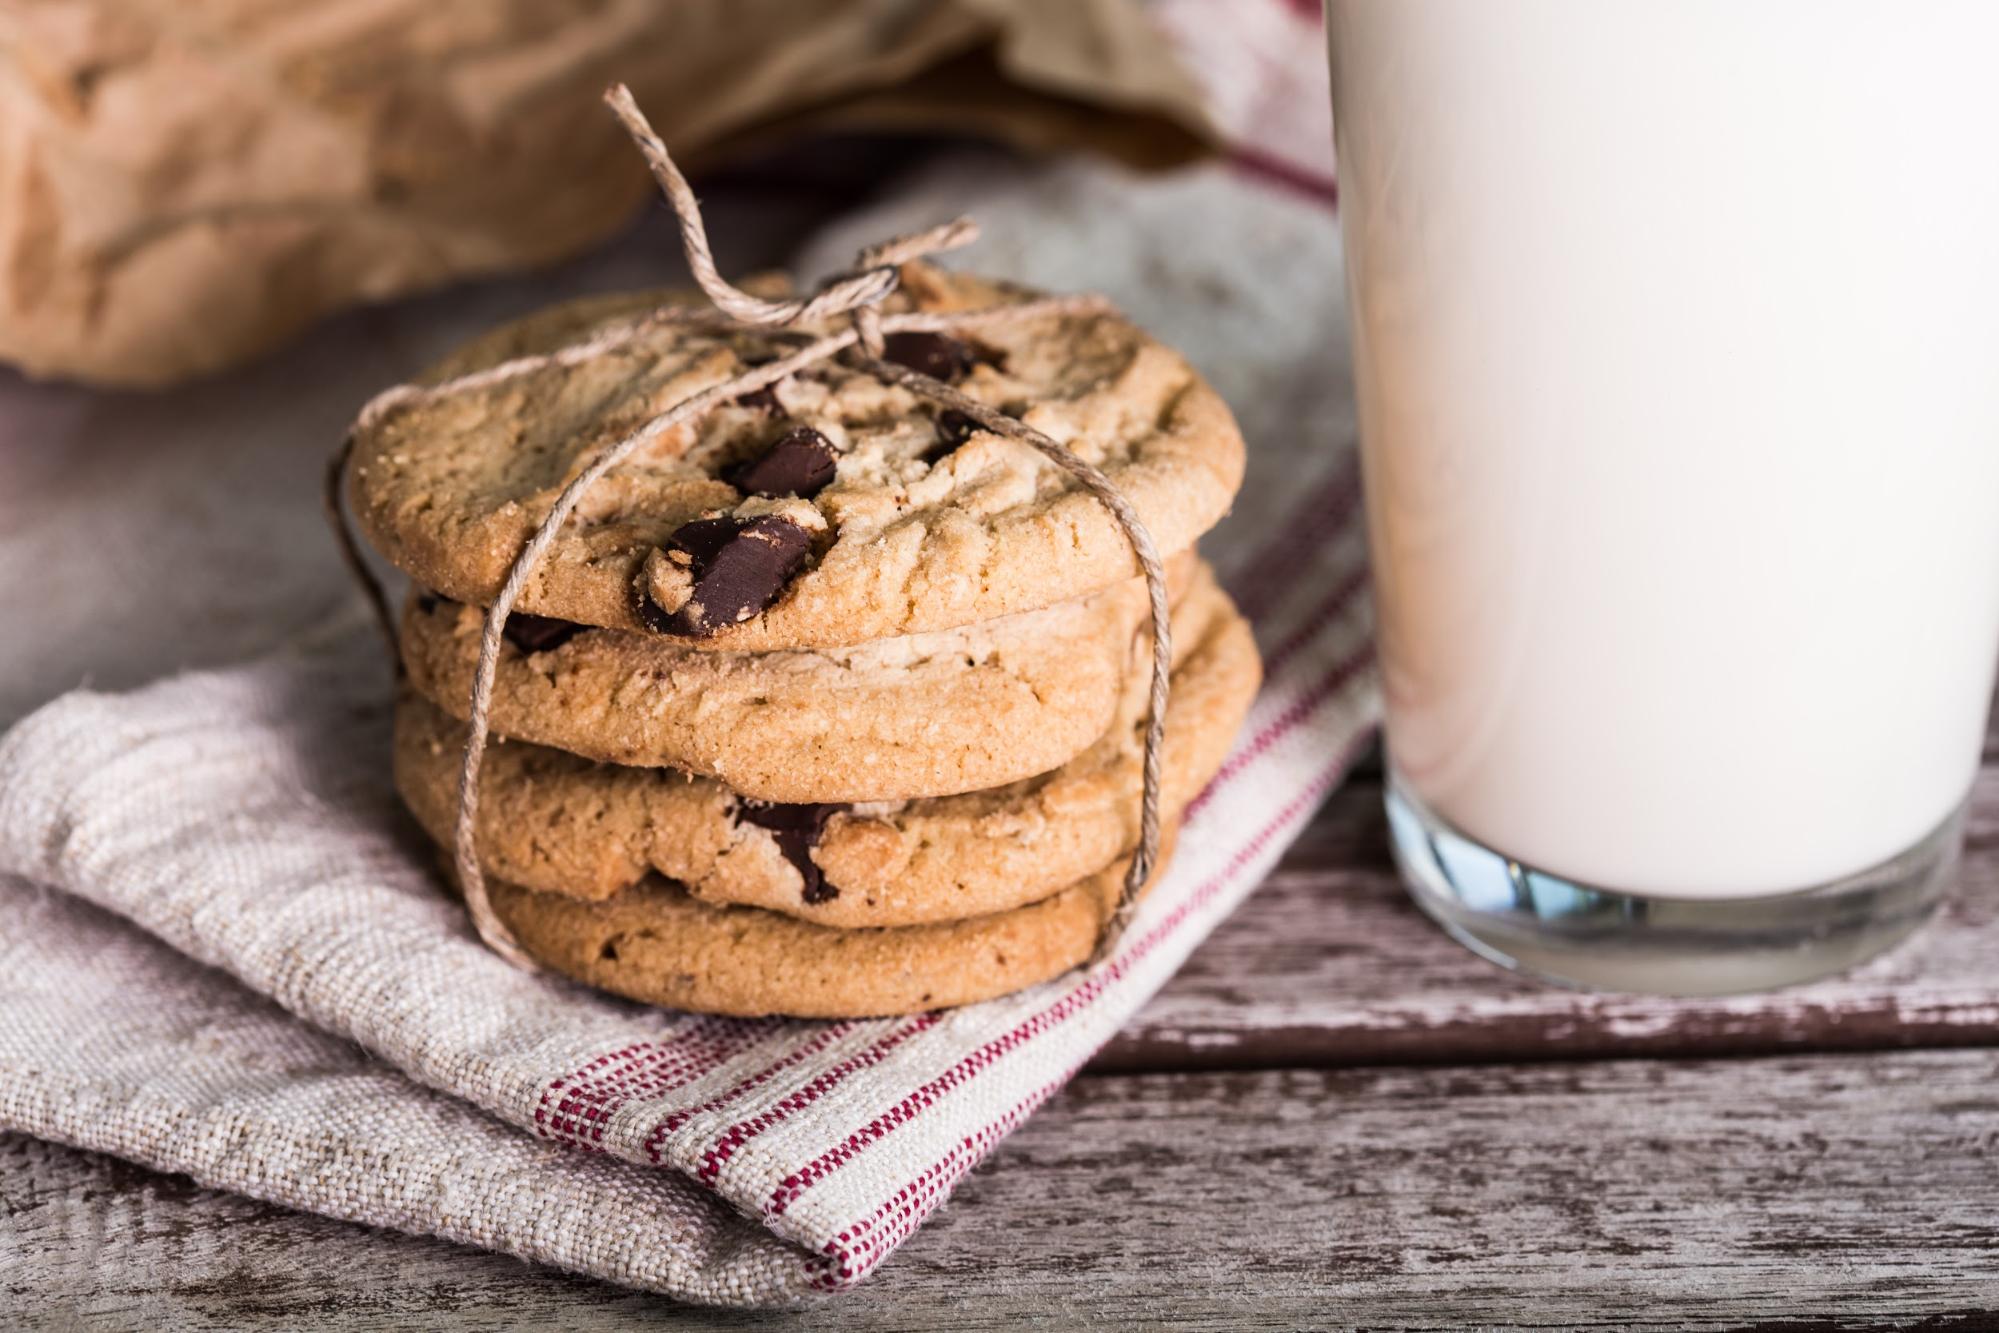 Plant-based milk alternatives pair perfectly with cookies.